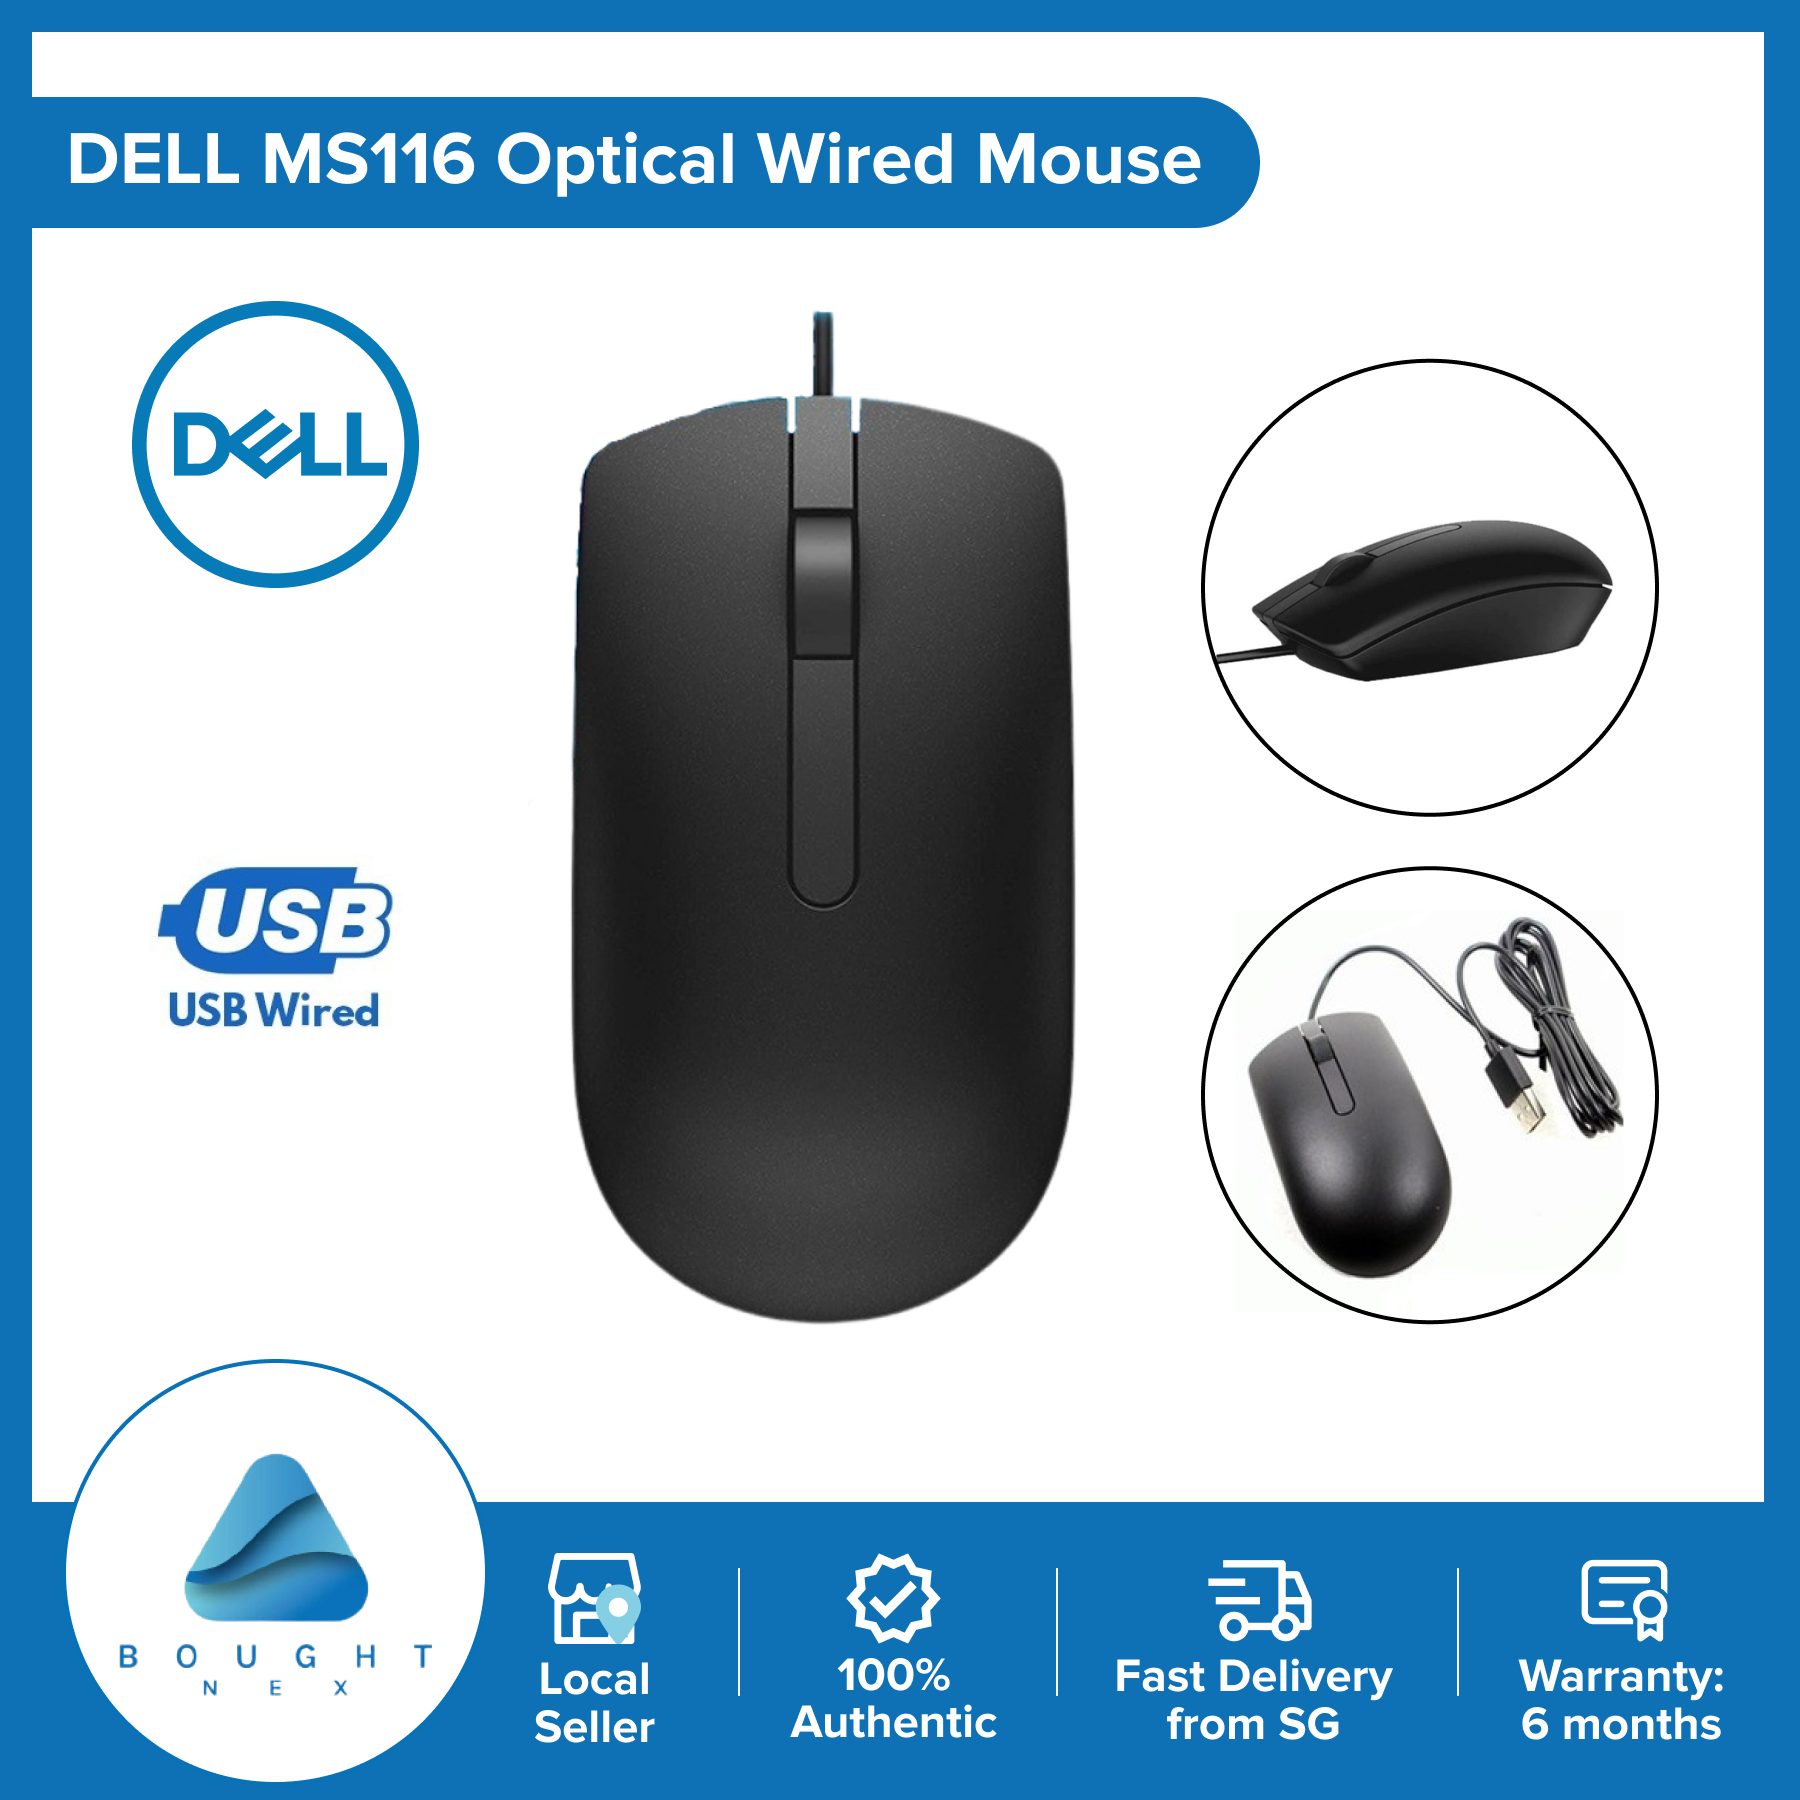 DELL MS116 Optical Wired Mouse USB 3-Button Optical Mouse | Lazada Singapore